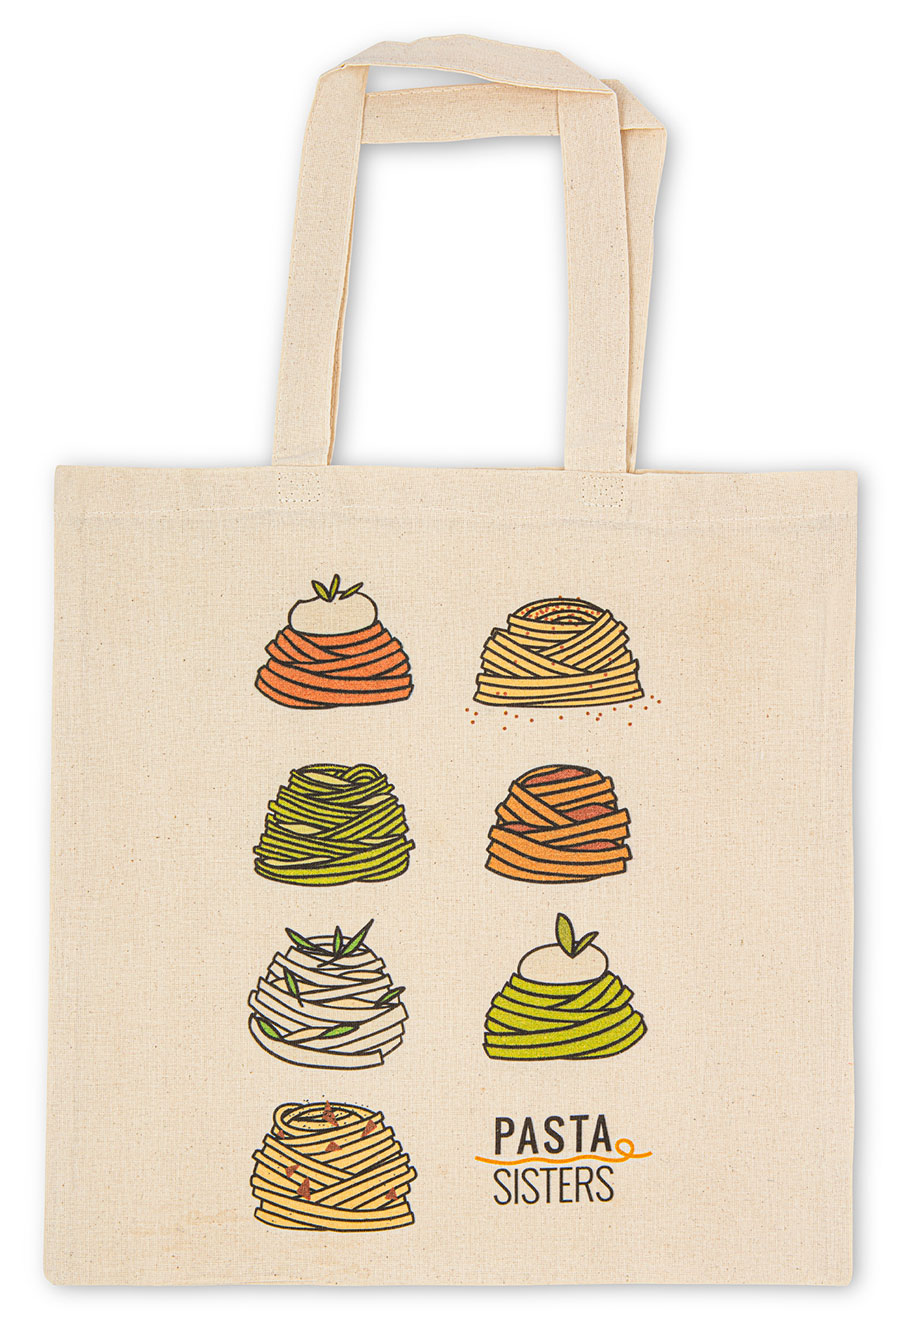 Pasta Sisters, All the Pasta Tote Bag $20